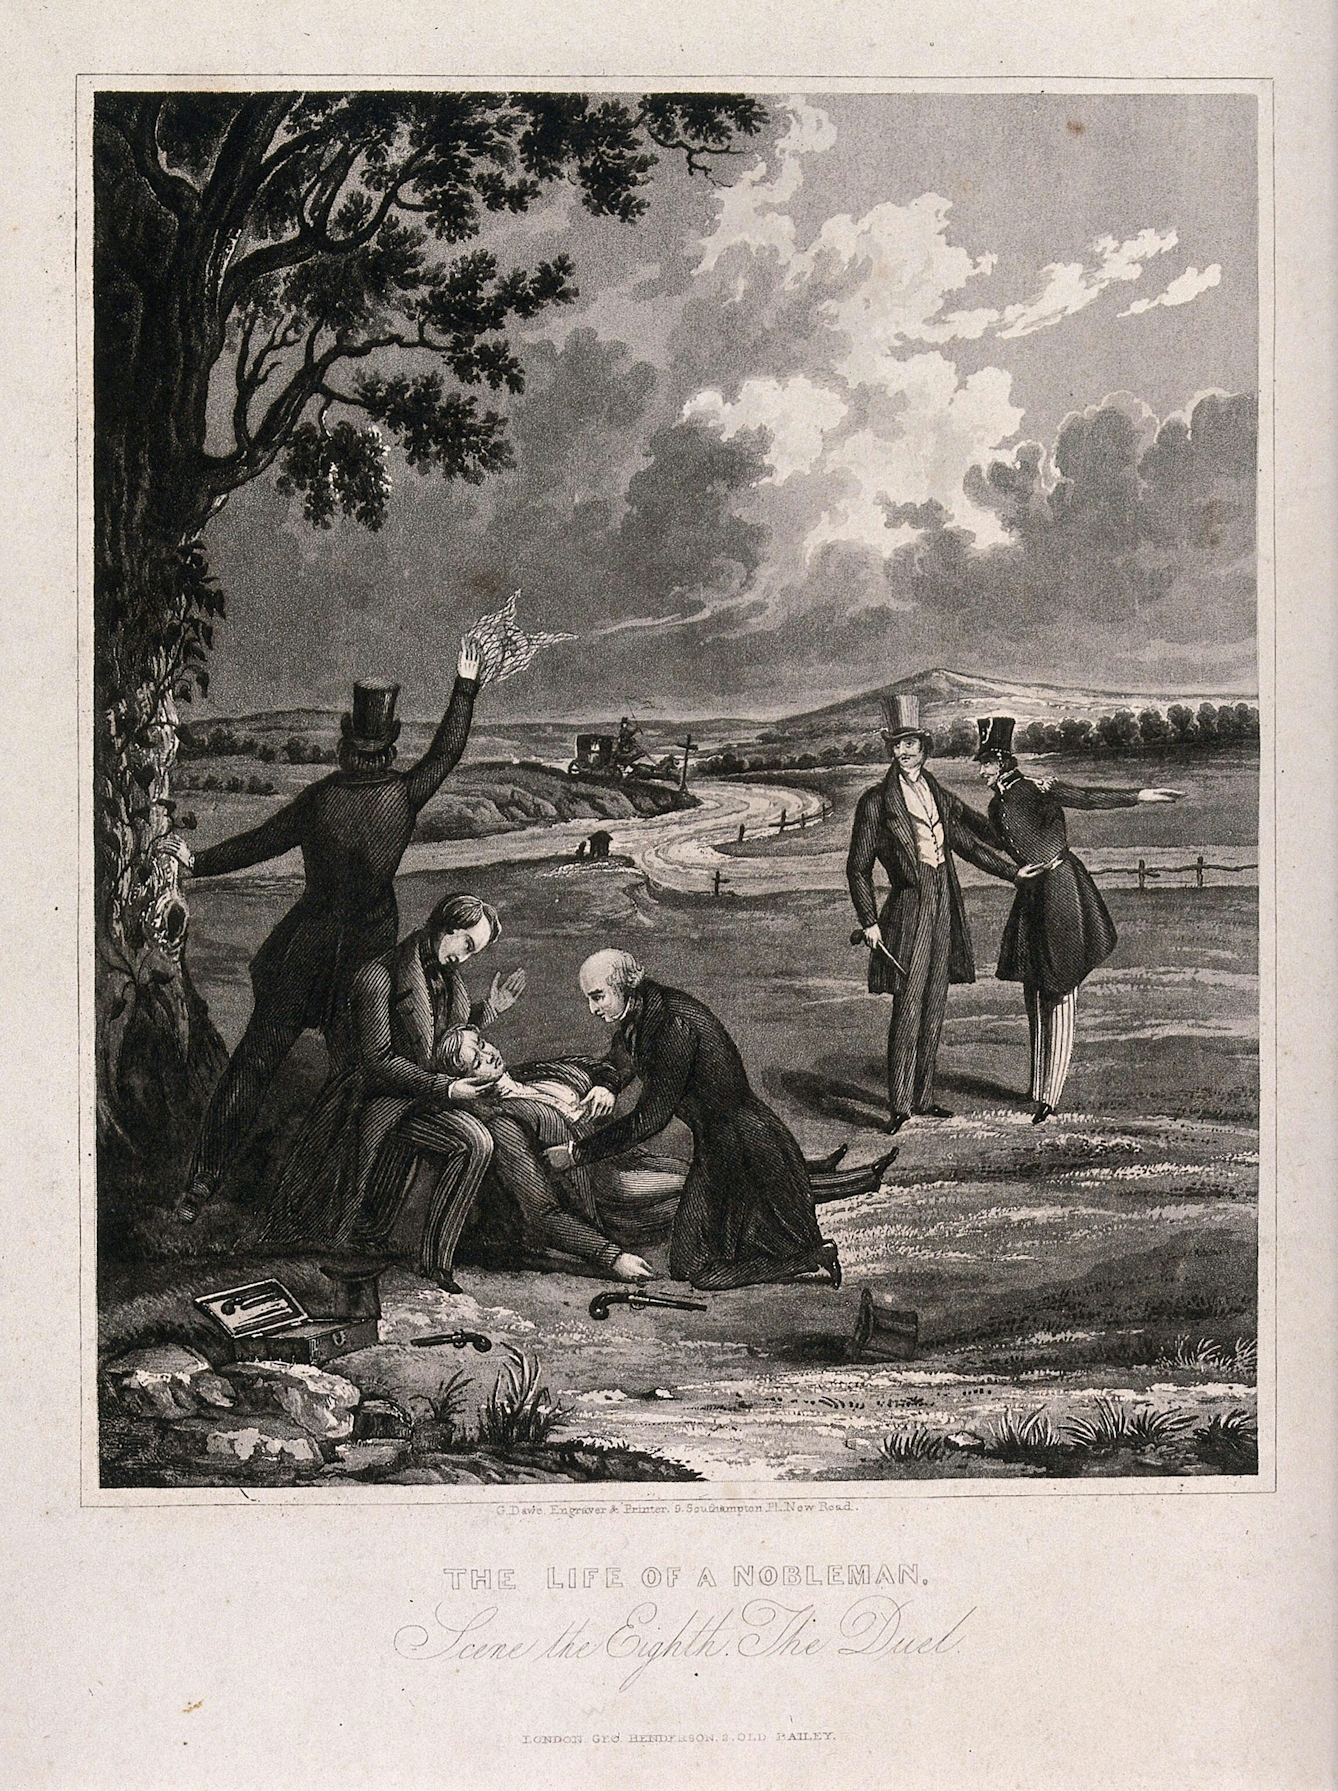 An aquatint of man laying on the ground injured after taking part in a pistol duel. Several men are providing medical care, whilst another man attempts to attract the attention of a carriage in the distance. Two other men stand watching.